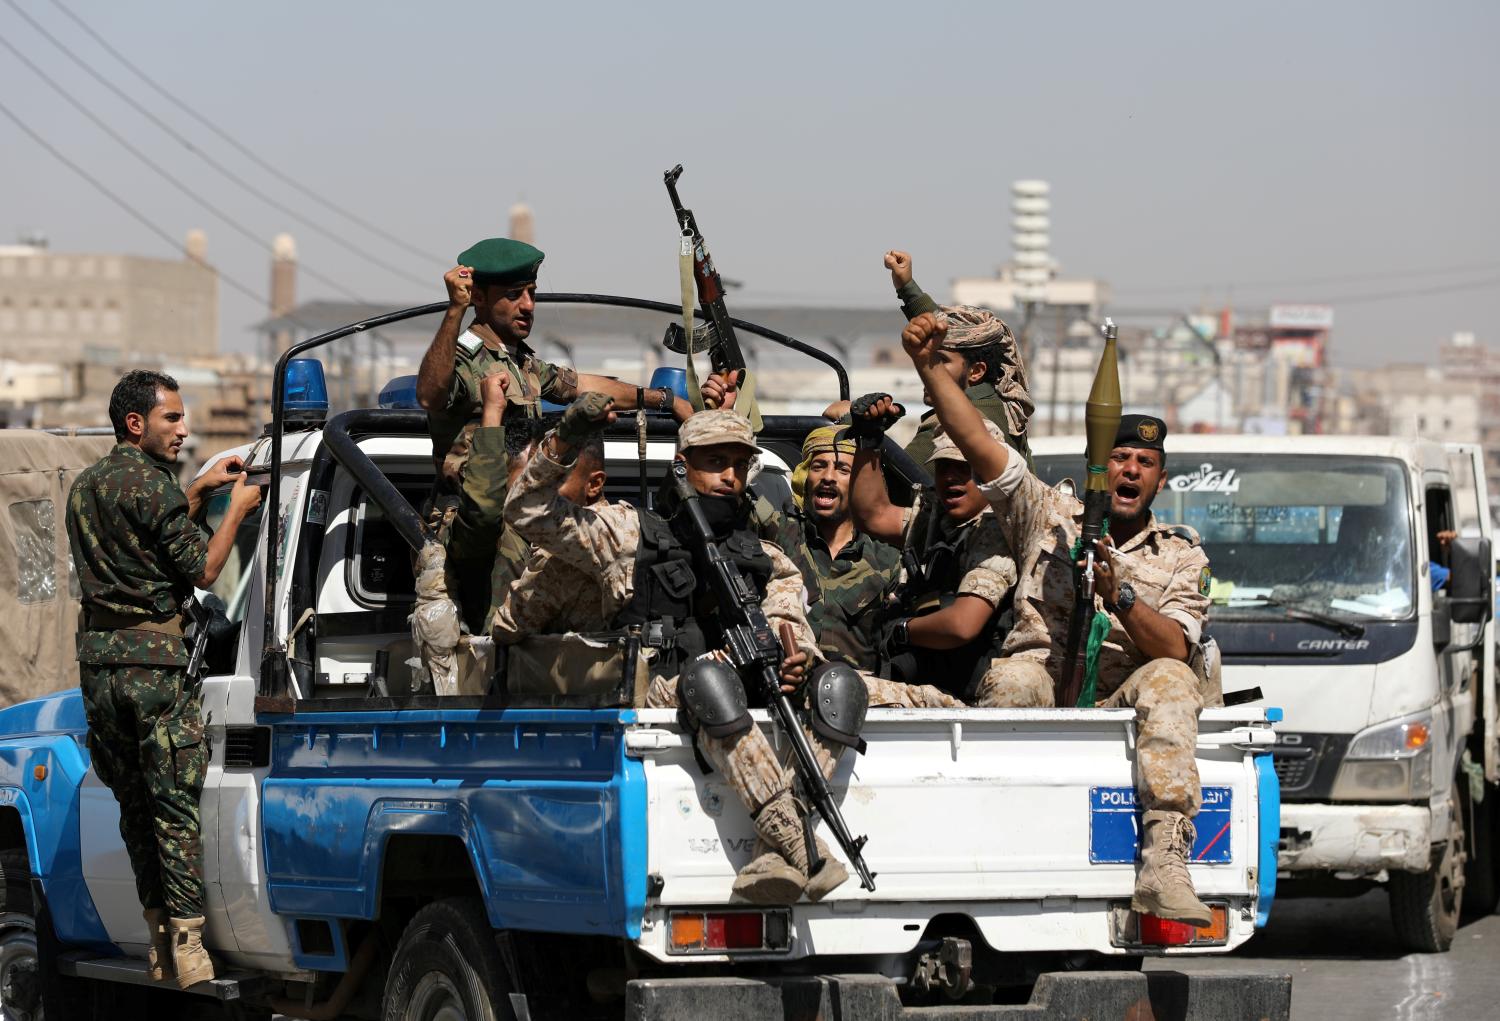 FILE PHOTO: Houthi troops ride on the back of a police patrol truck after participating in a Houthi gathering in Sanaa, Yemen February 19, 2020. REUTERS/Khaled Abdullah/File Photo